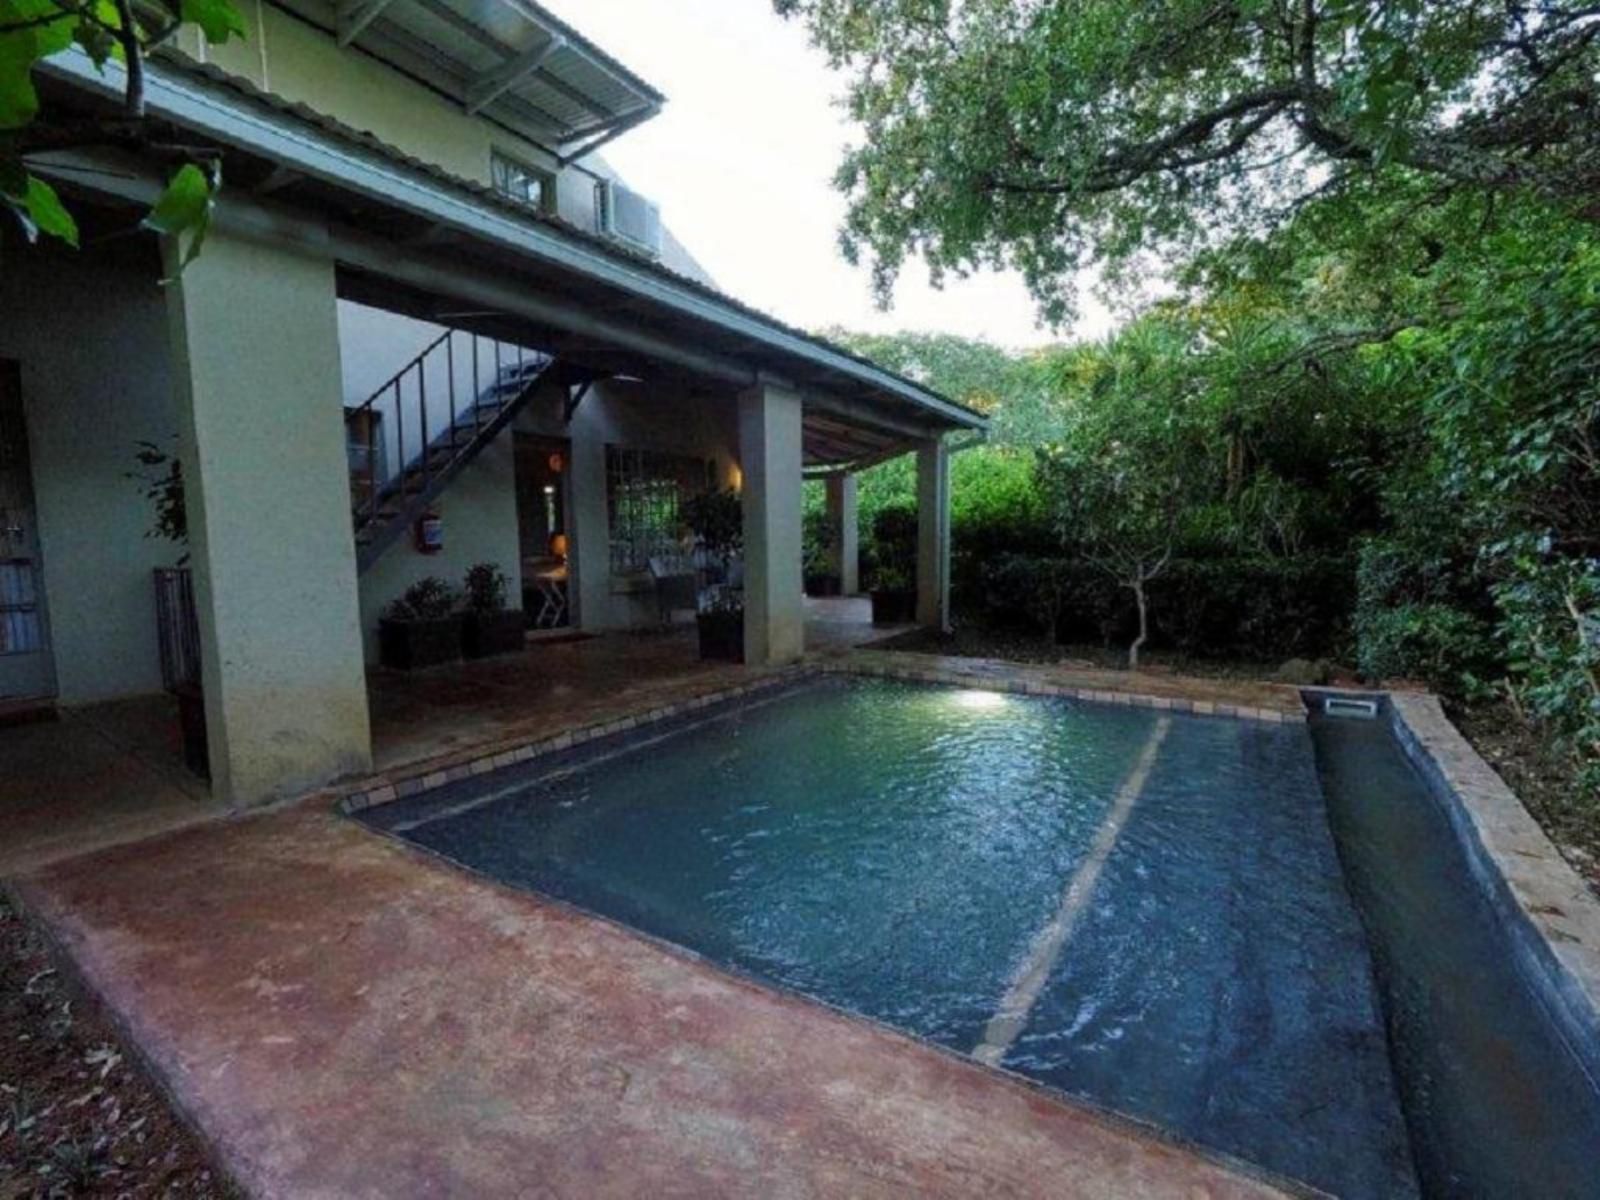 Kruger Park House Hazyview Mpumalanga South Africa House, Building, Architecture, Garden, Nature, Plant, Swimming Pool